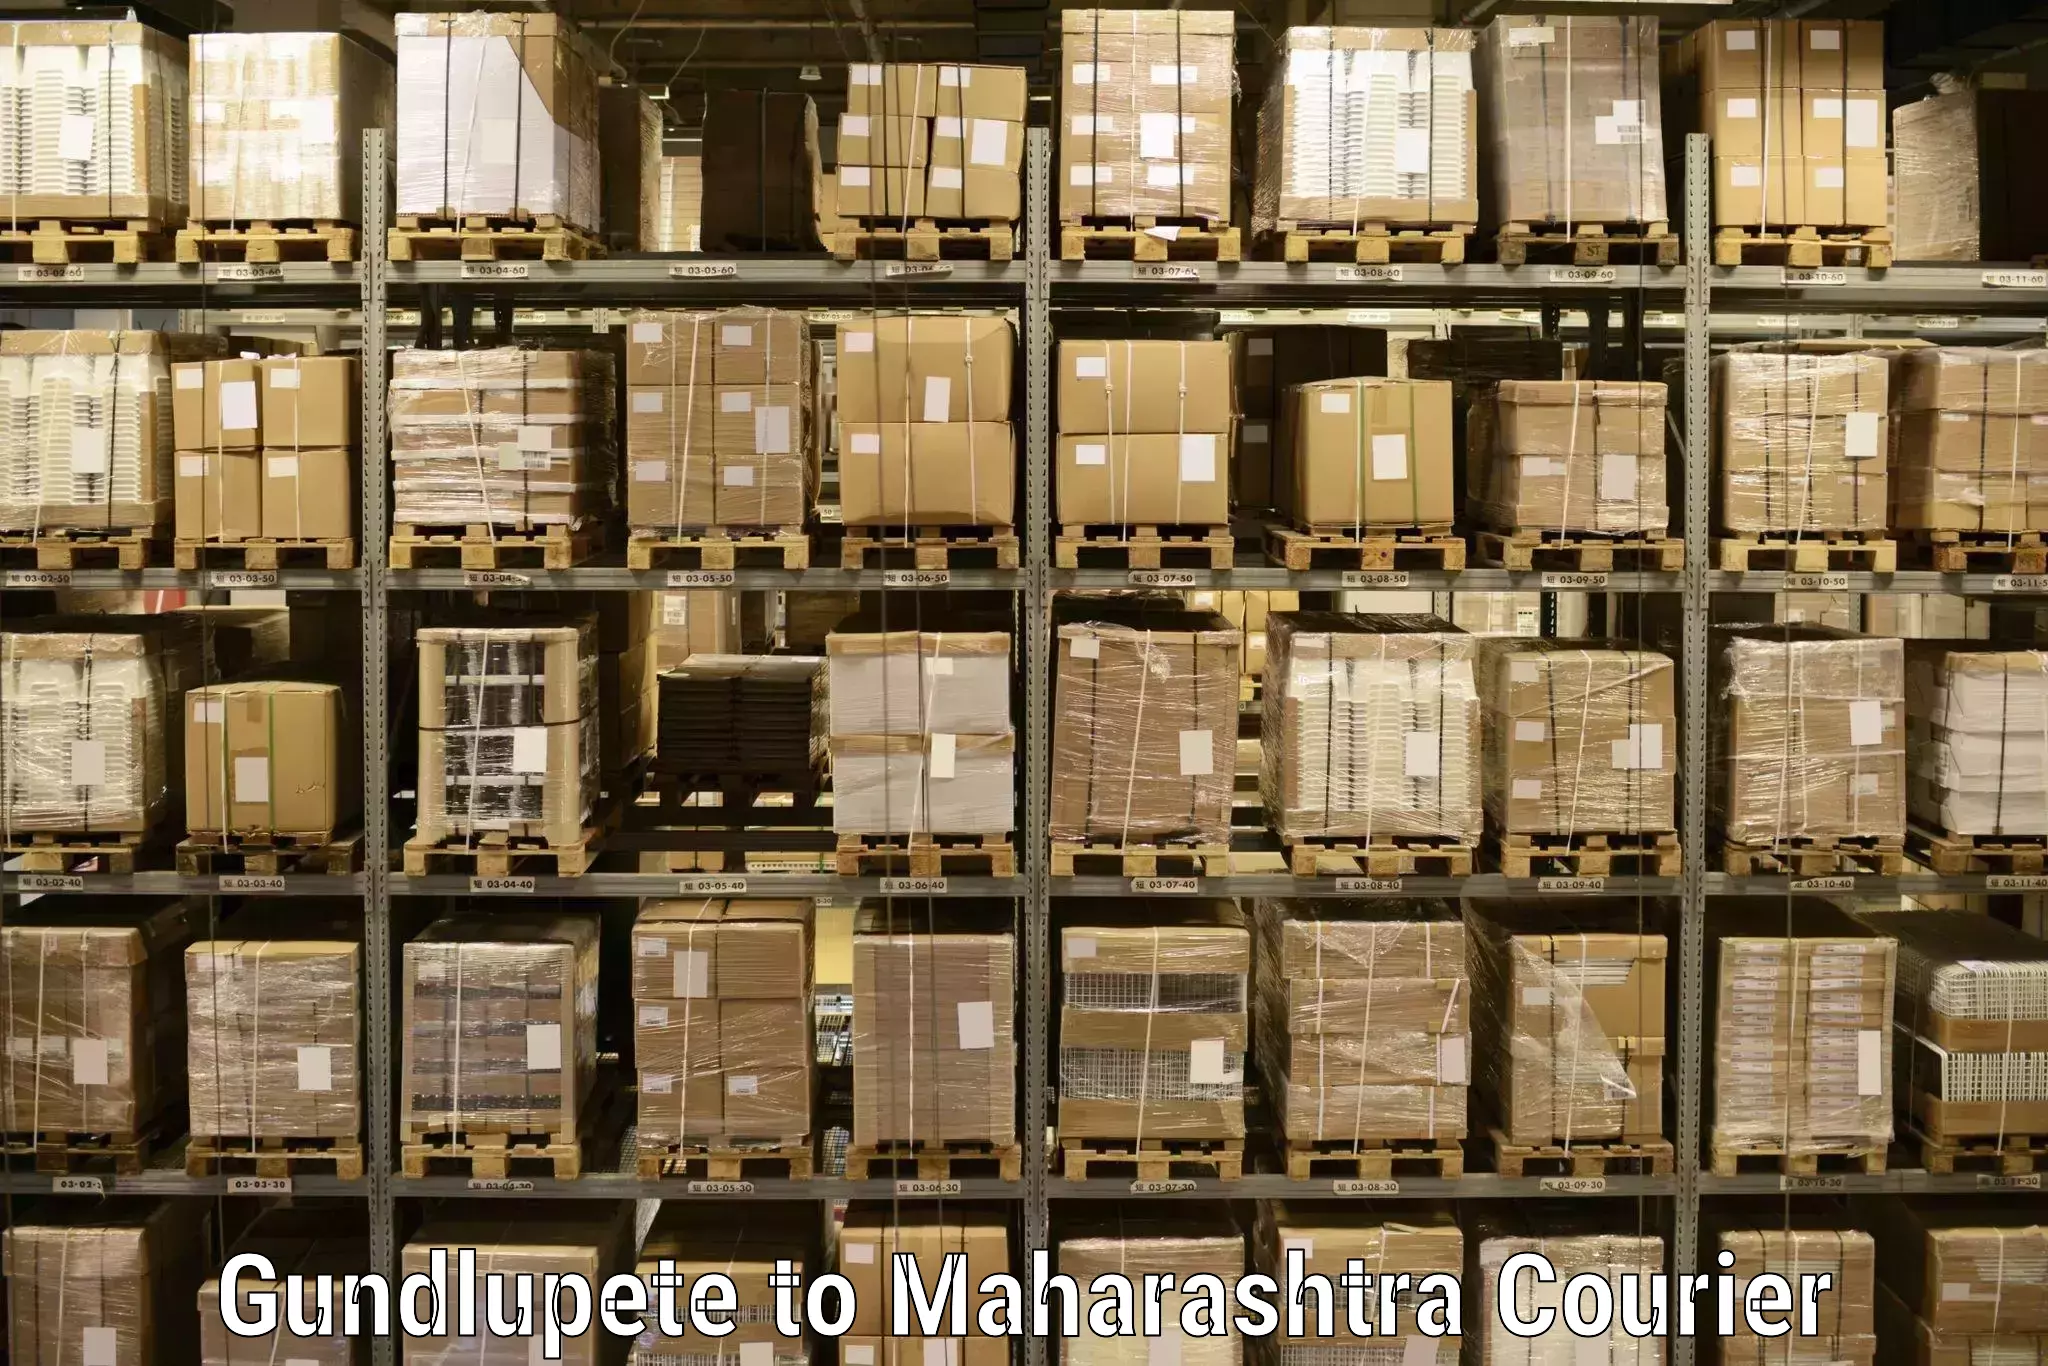 International courier networks Gundlupete to Chalisgaon